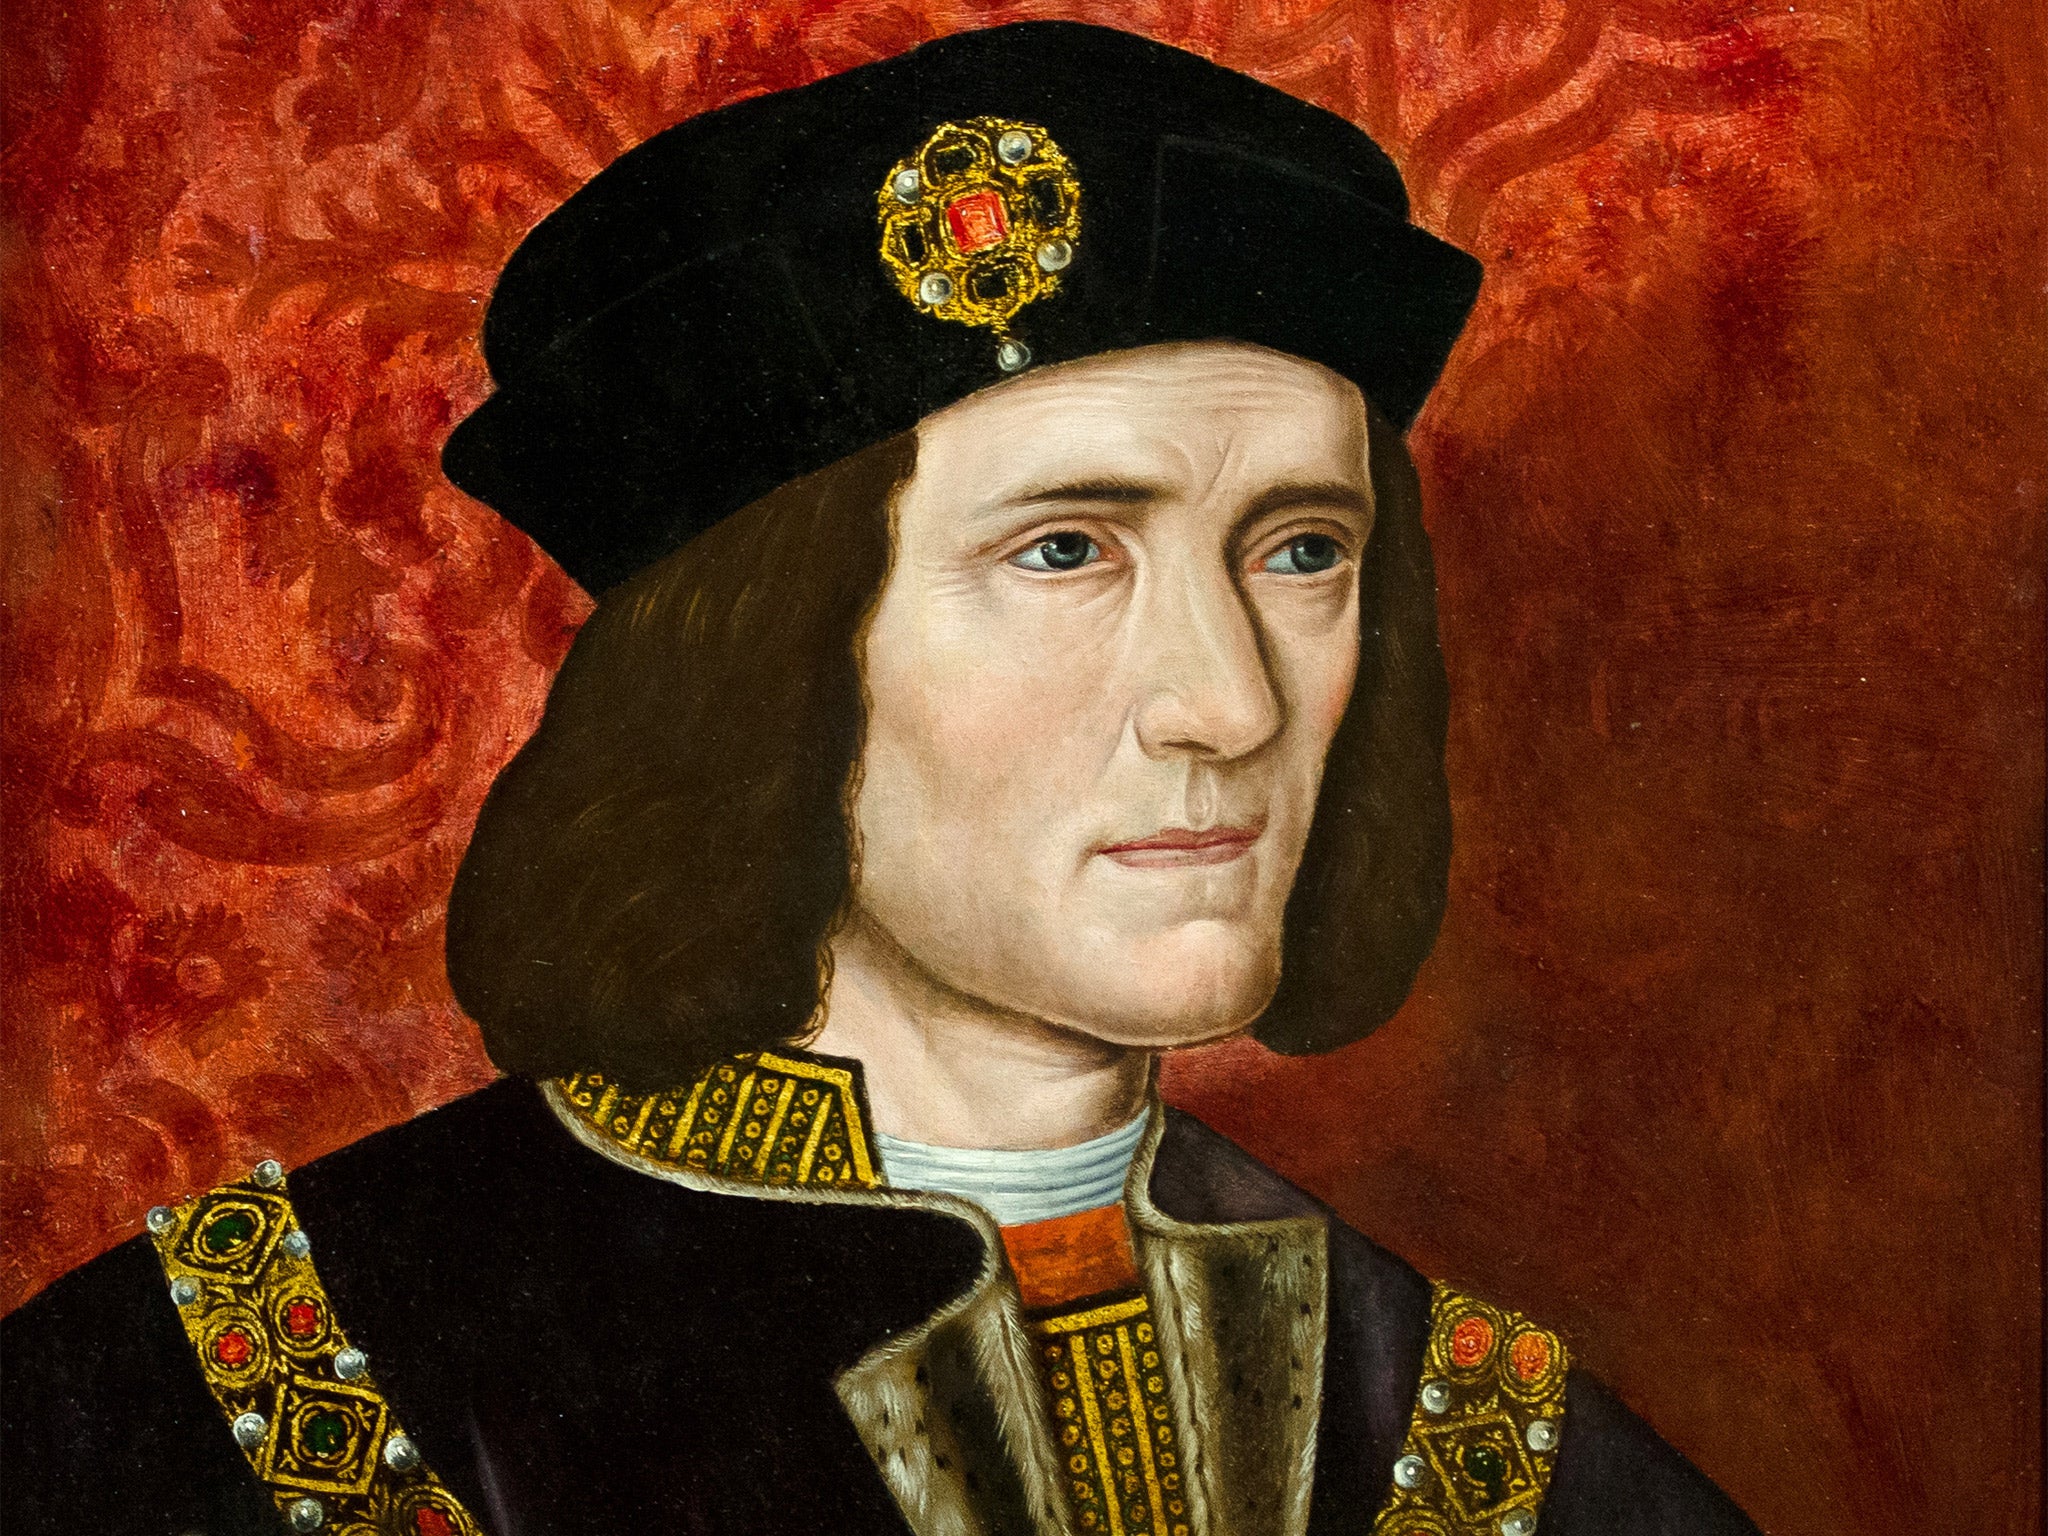 A painting of King Richard III, displayed in the National Portrait Gallery in central London